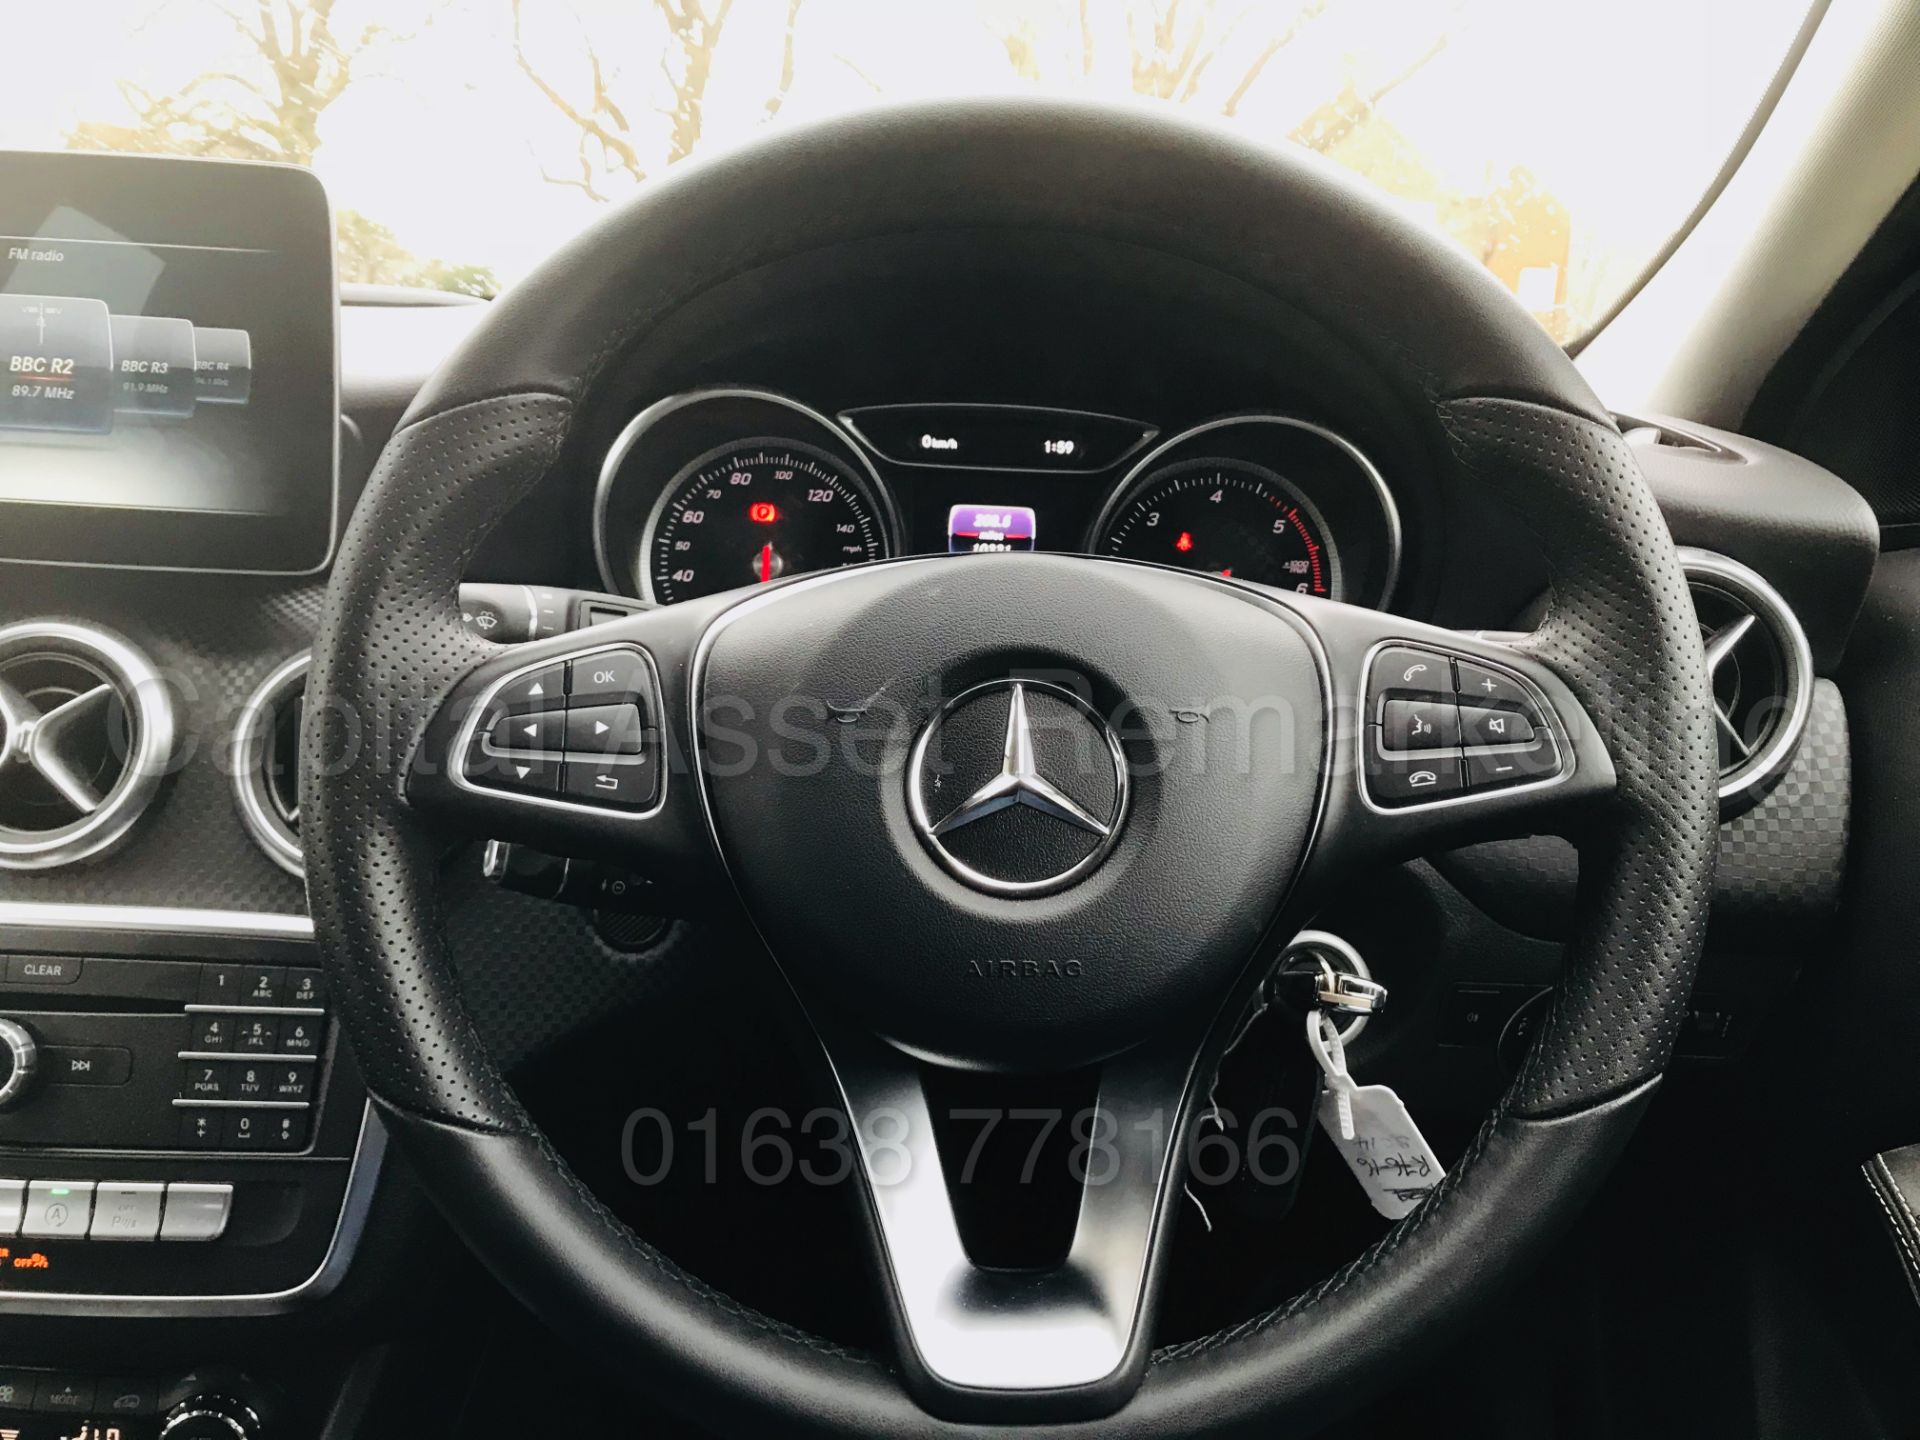 MERCEDES-BENZ A180D 'SPORT' (2017 MODEL) '7G TRONIC AUTO - LEATHER - SAT NAV' (1 OWNER FROM NEW) - Image 40 of 41